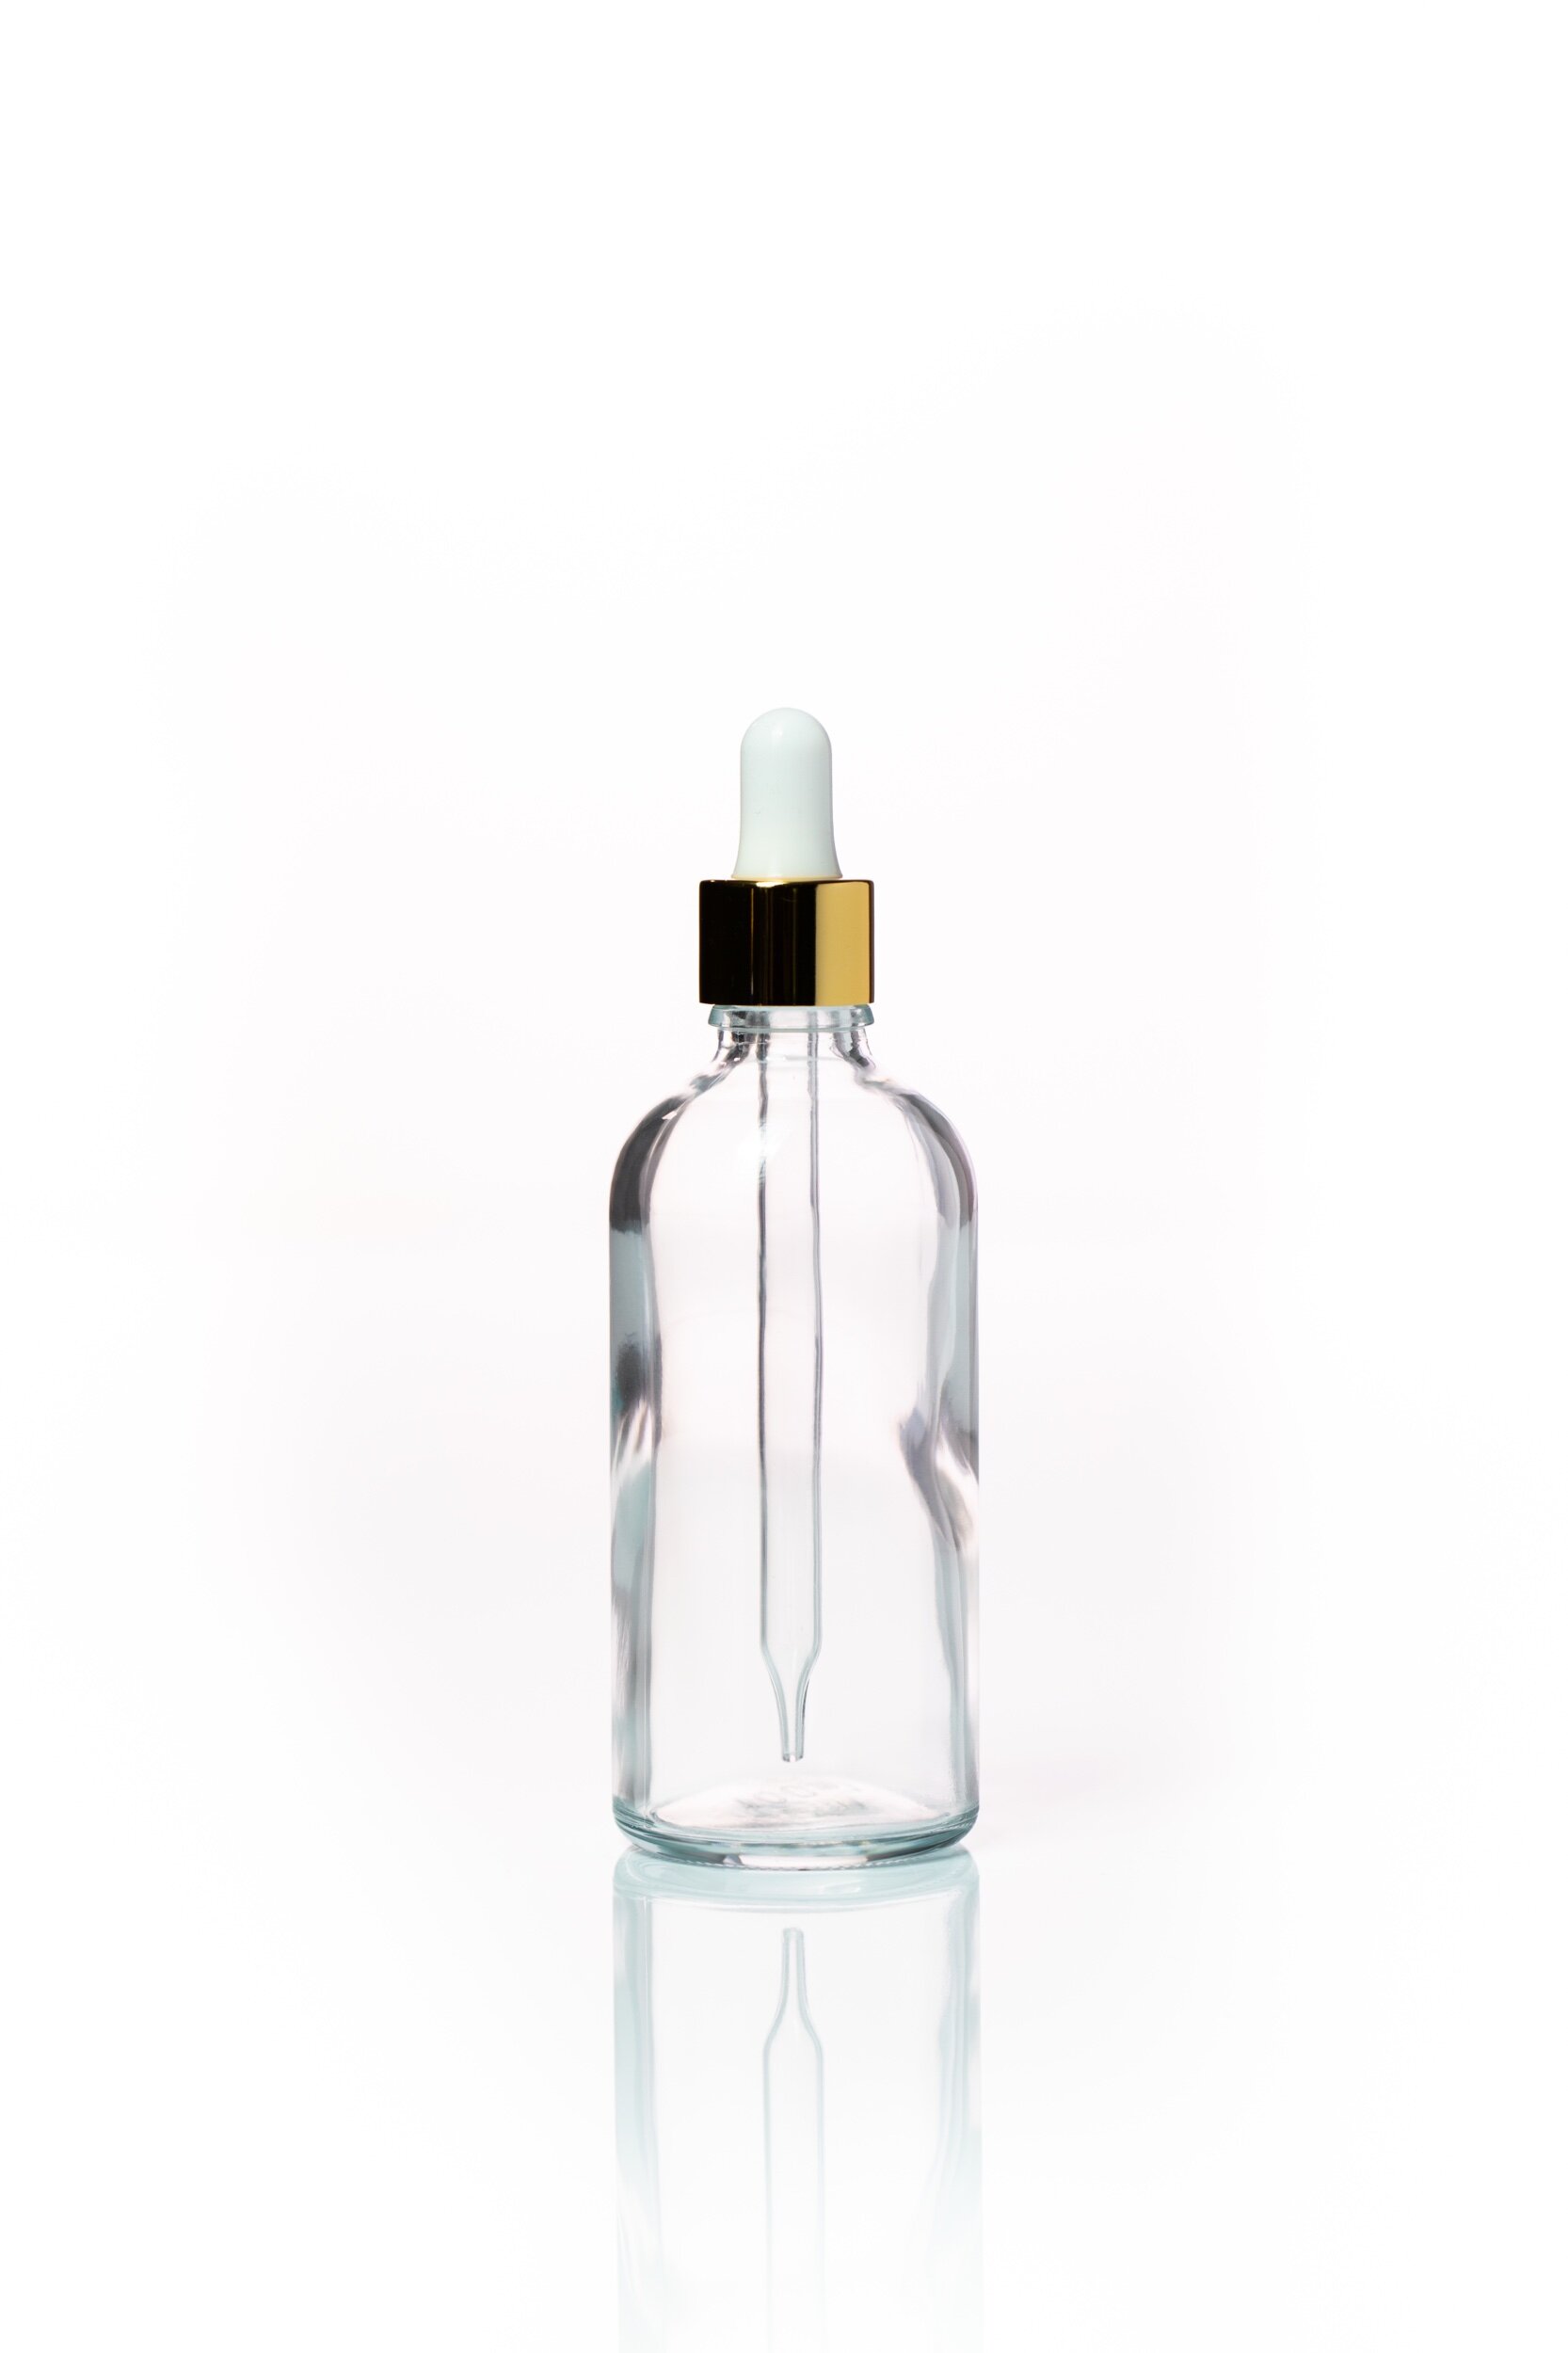 100ml Clear Glass Bottle with gold dropper 4480 x 6720.jpeg